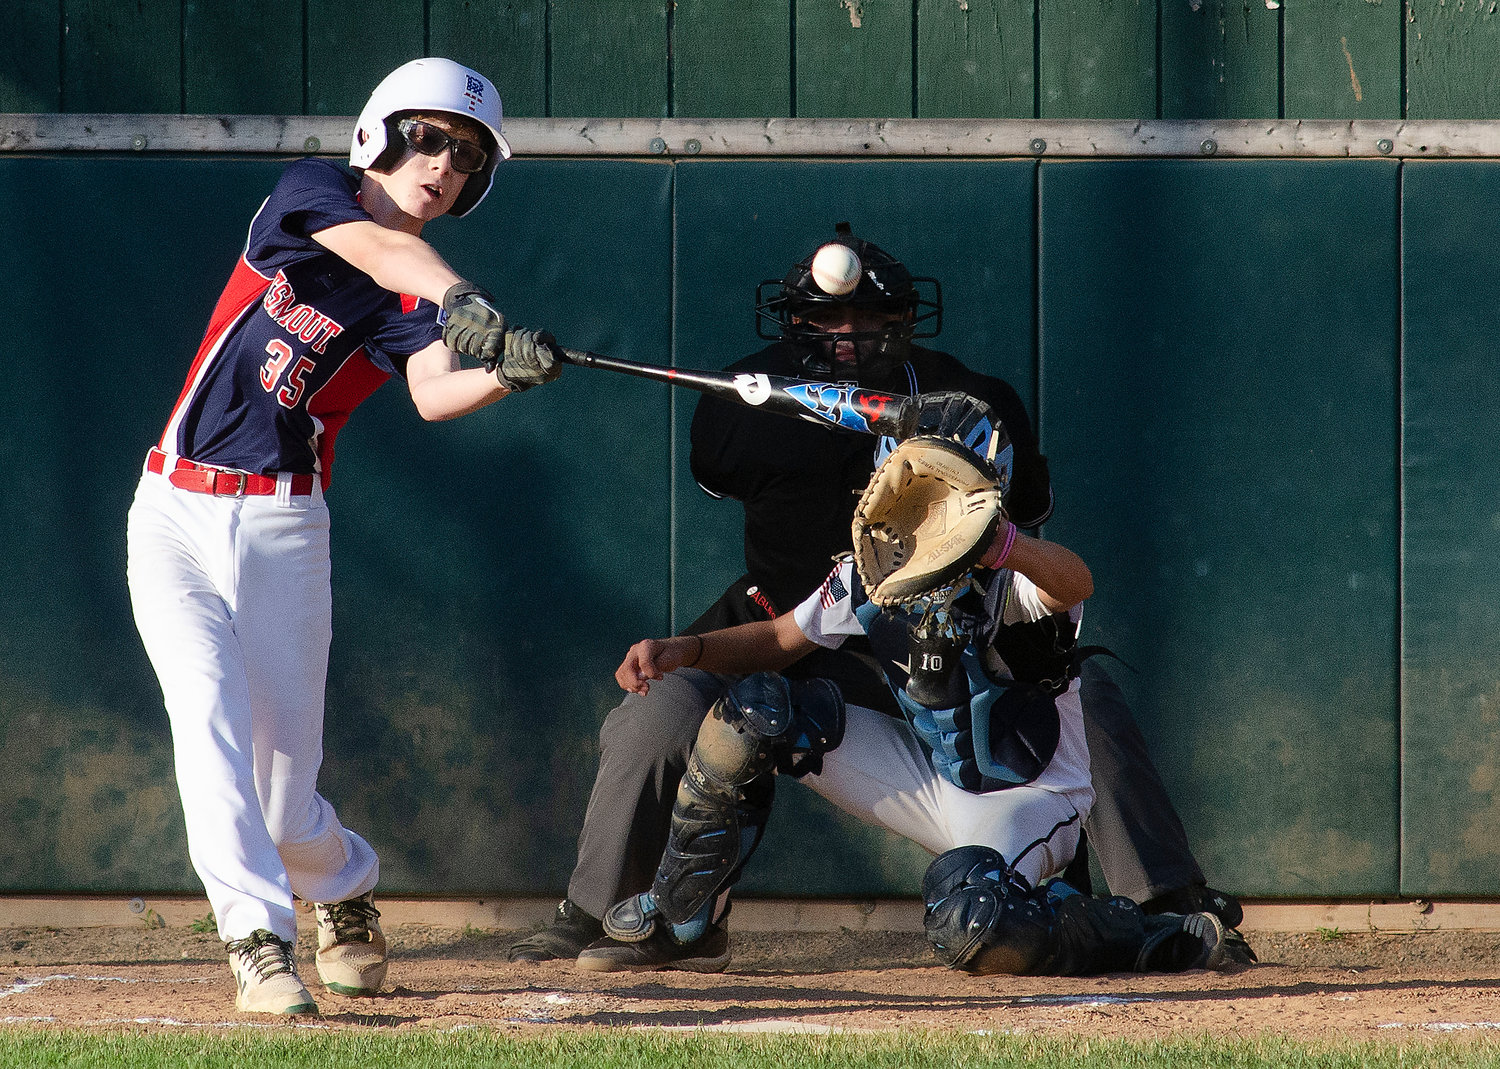 Tyler Boiani smashes a hit to the left centerfield gap for an RBI double in the fourth inning.